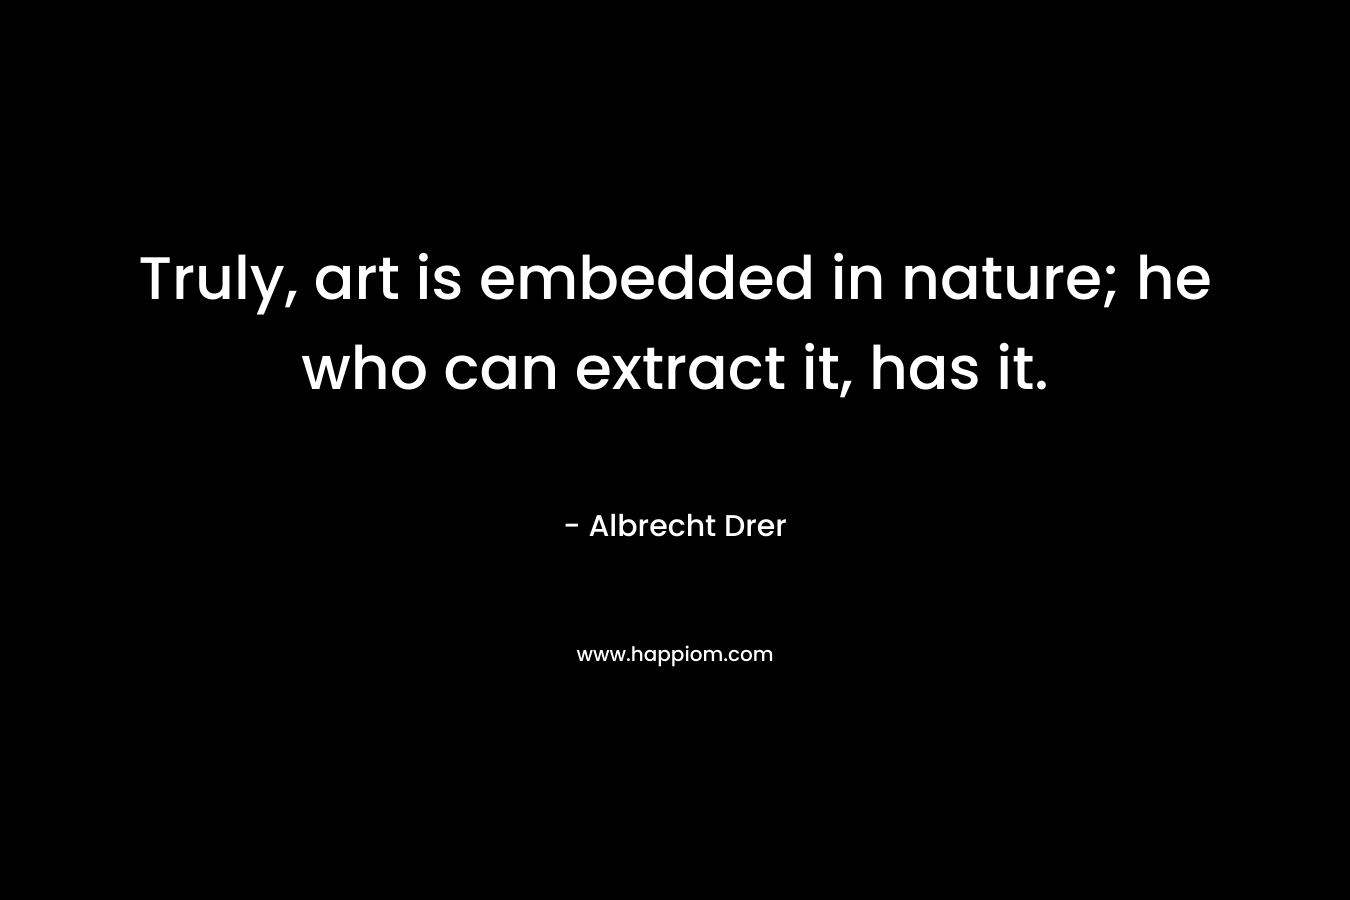 Truly, art is embedded in nature; he who can extract it, has it.